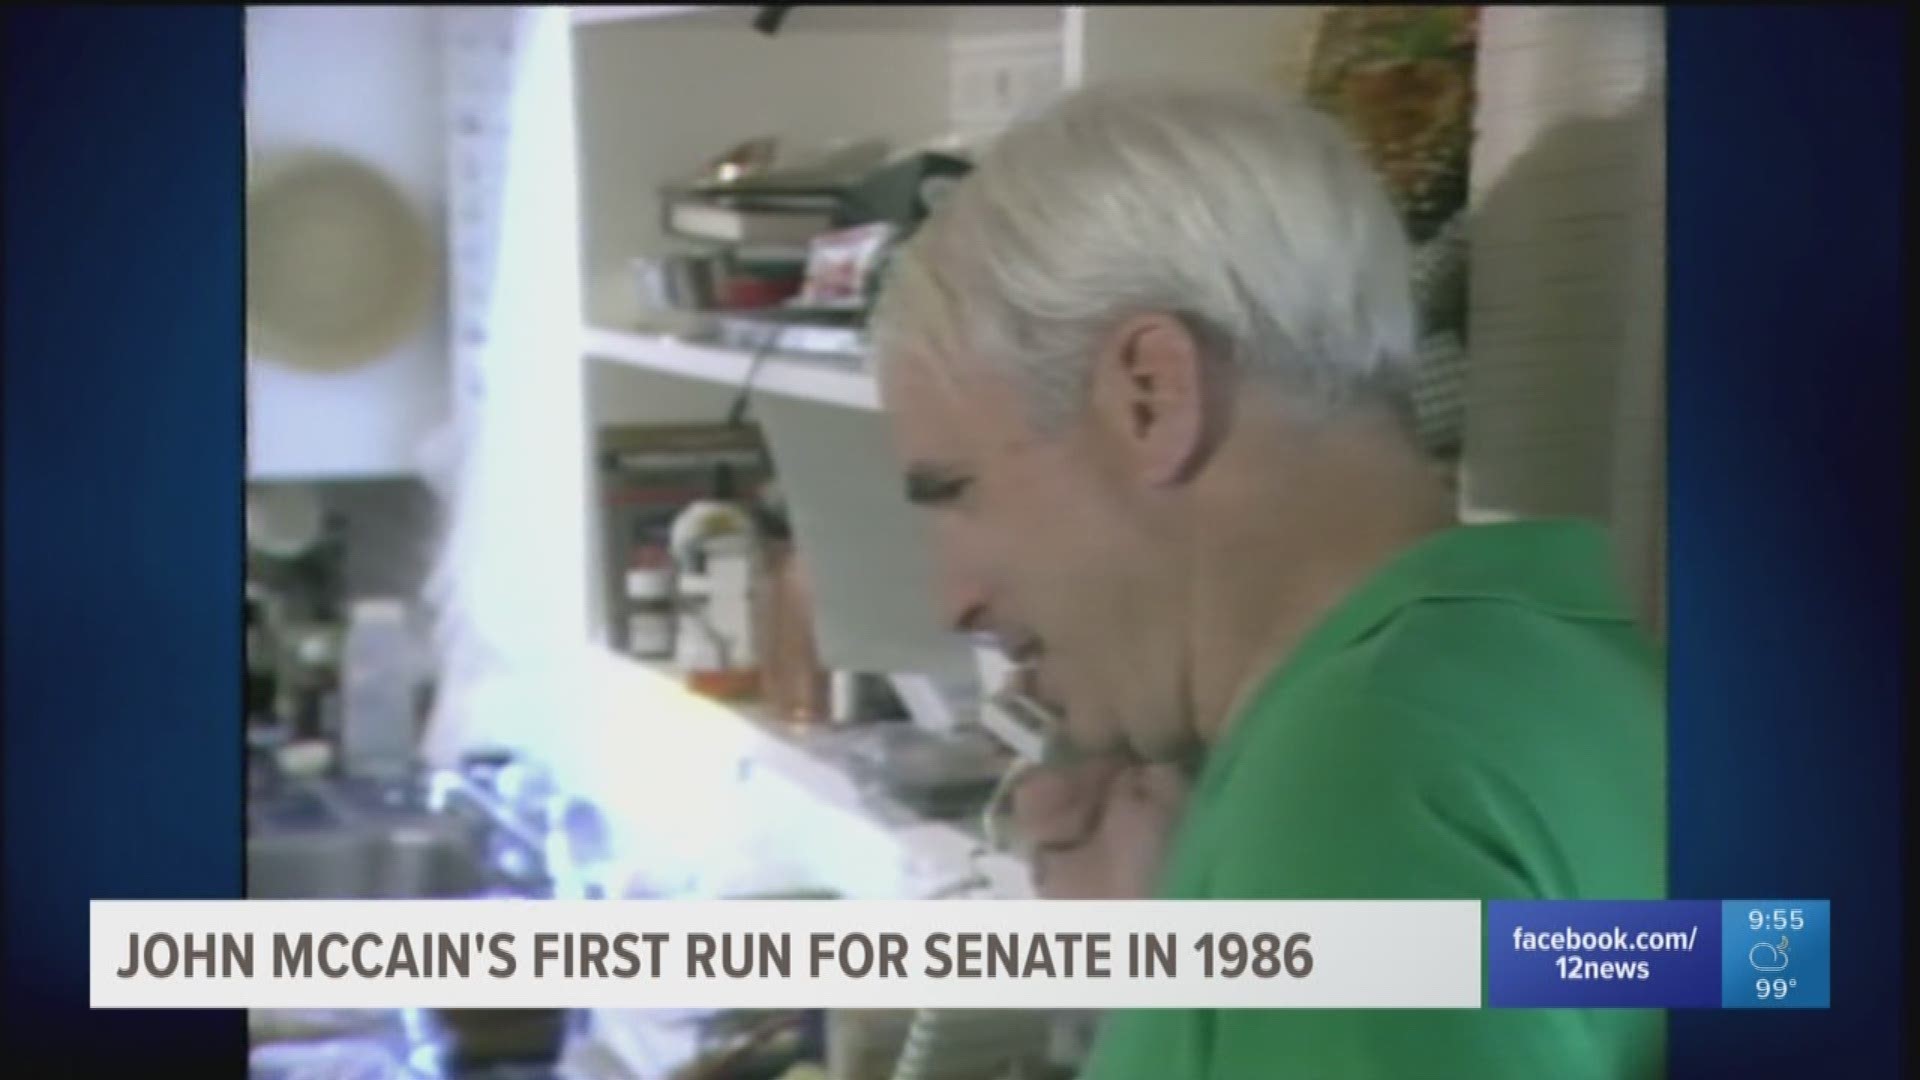 A look back at McCain's life: After Barry Goldwater's retirement, John McCain made his first run for the Senate in 1986.